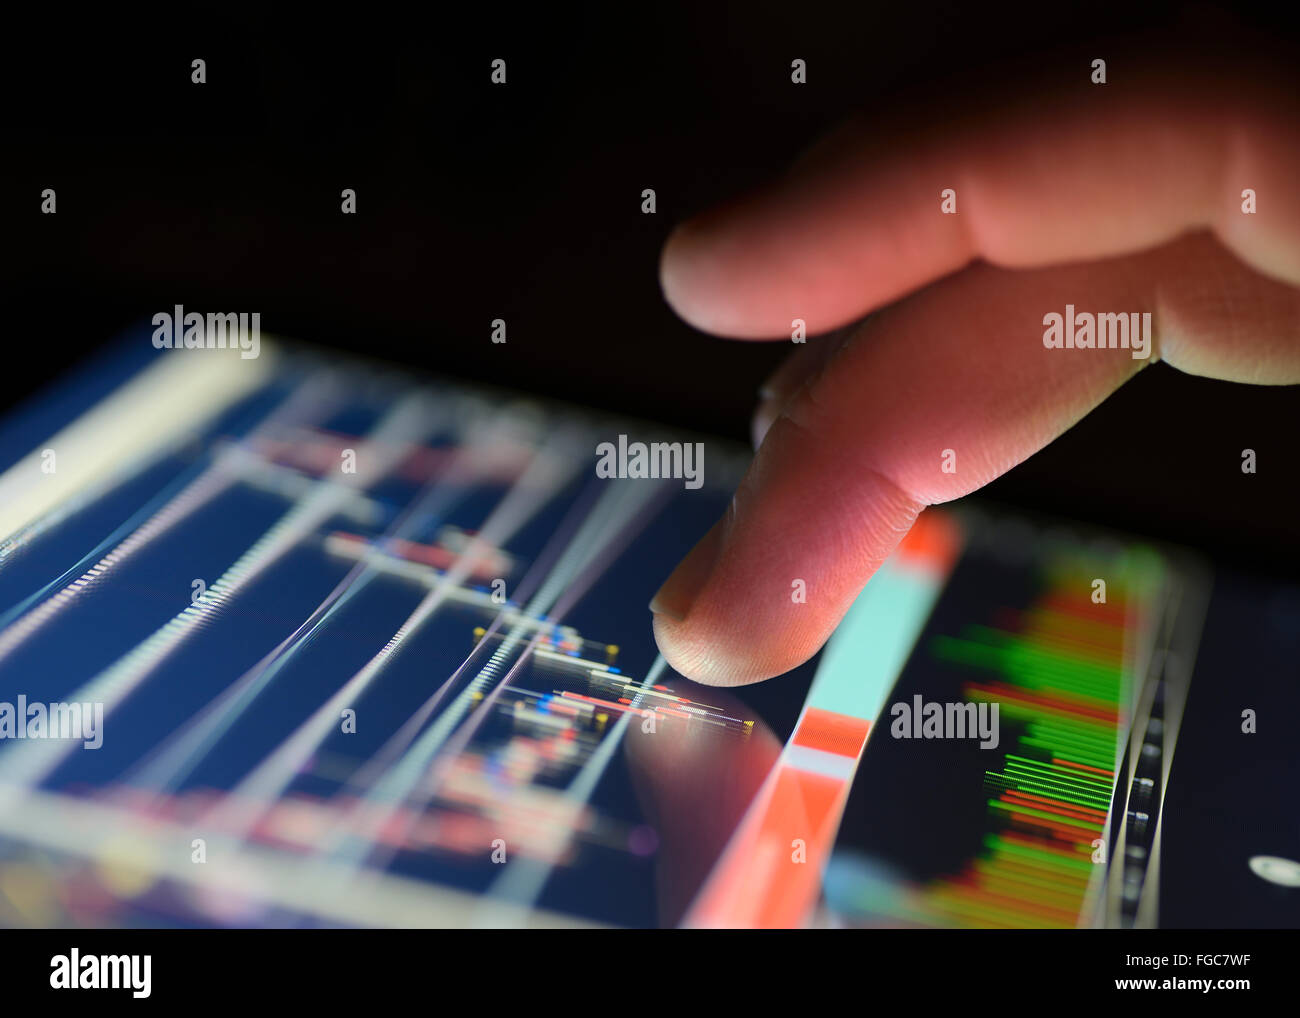 Traders finger using the touchscreen of a digital tablet displaying a financial Market graph. close up. Stock Photo